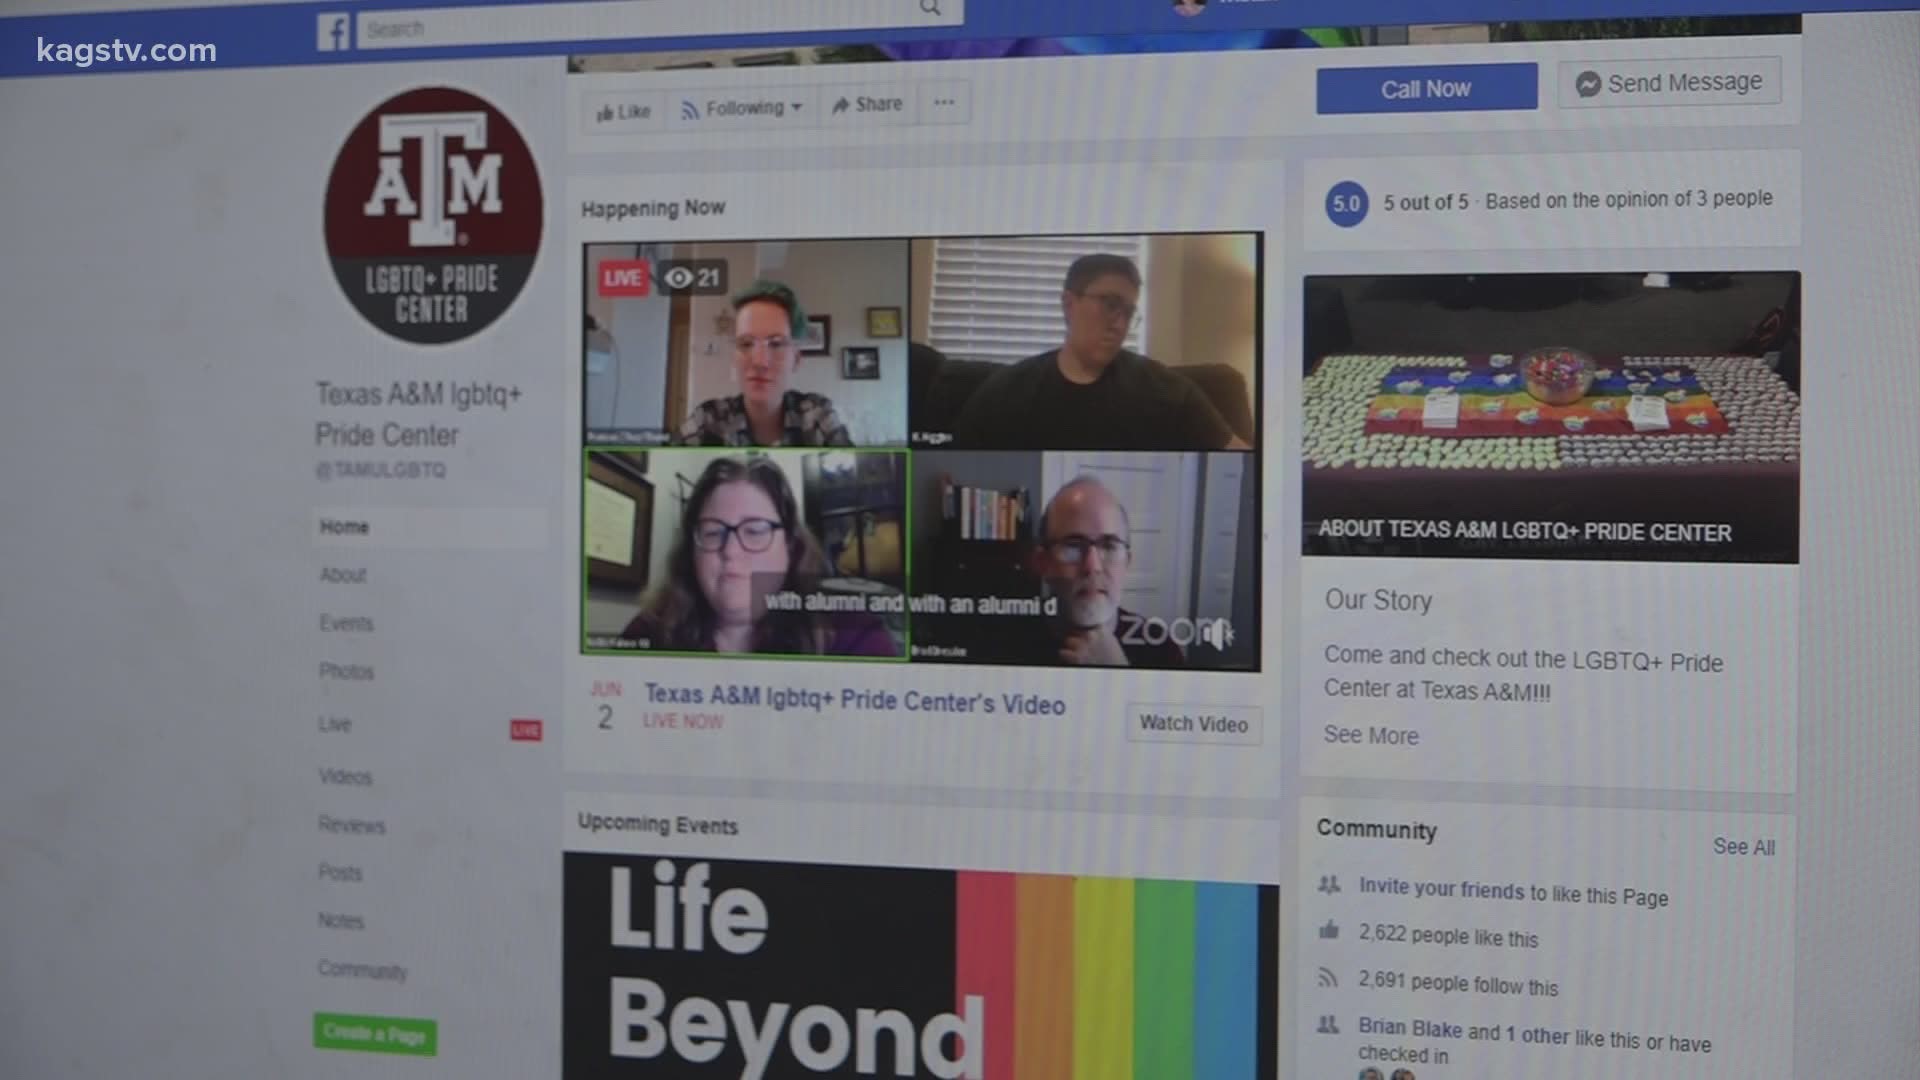 LGBTQ groups have taken advantage of the online world and hold virtual versions of these meetings and hangouts to continue having a supportive community.